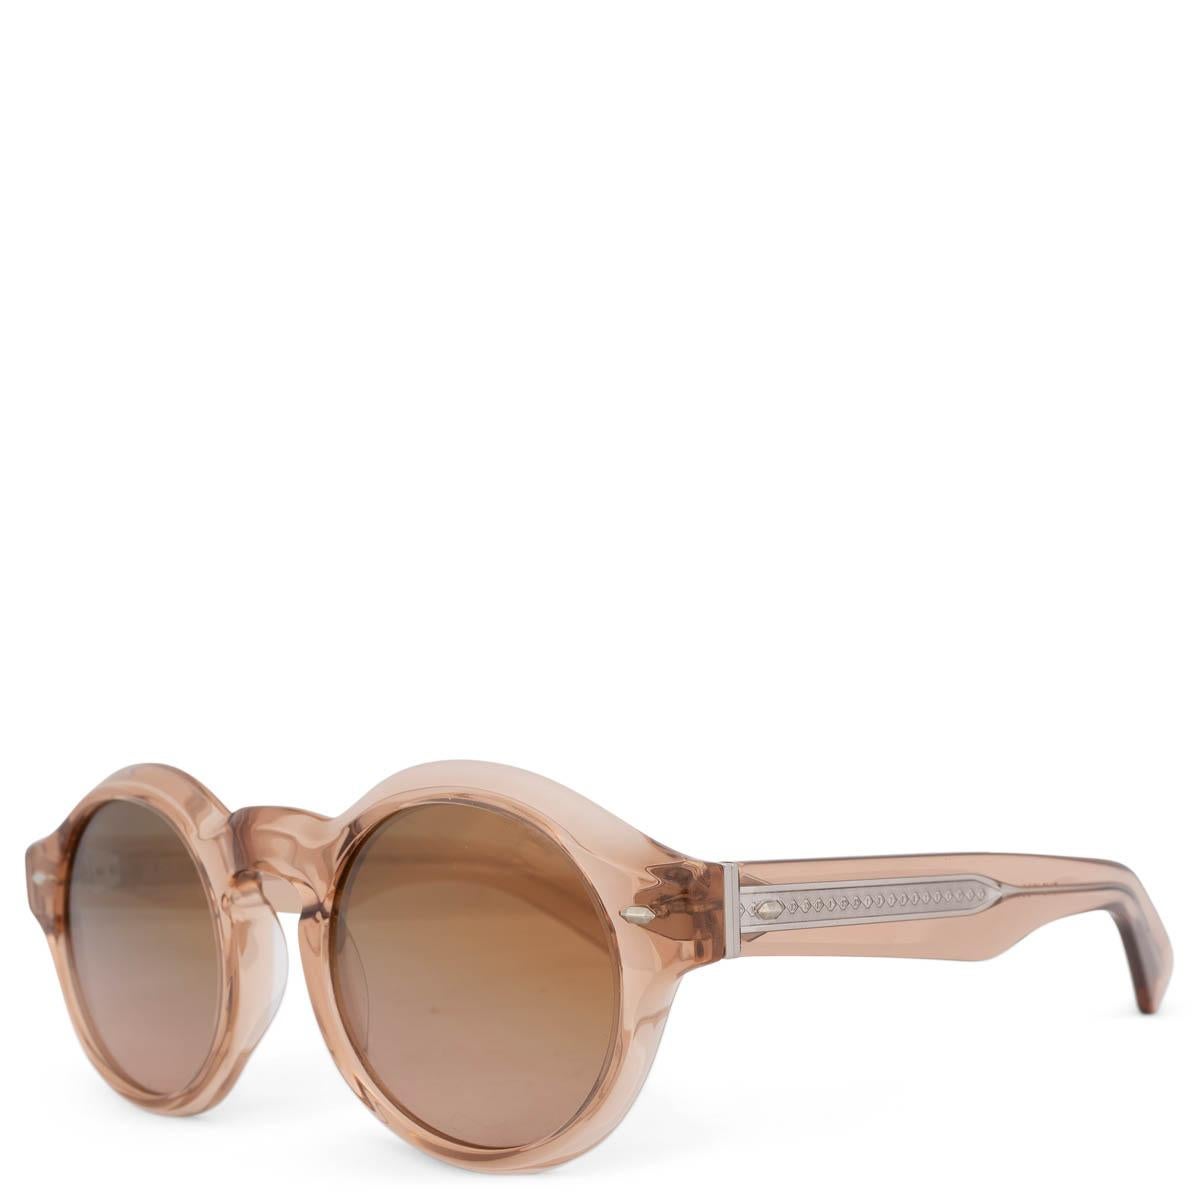 100% authentic Oliver Peoples Cassavet OV5493SU sunglasses in rose acetate with silver-tone metal details and beige gradient lenses. Has been worn and is in excellent condition. Comes with Tom Ford case. 

Measurements
Model	OV5493SU 
Width	14.5cm